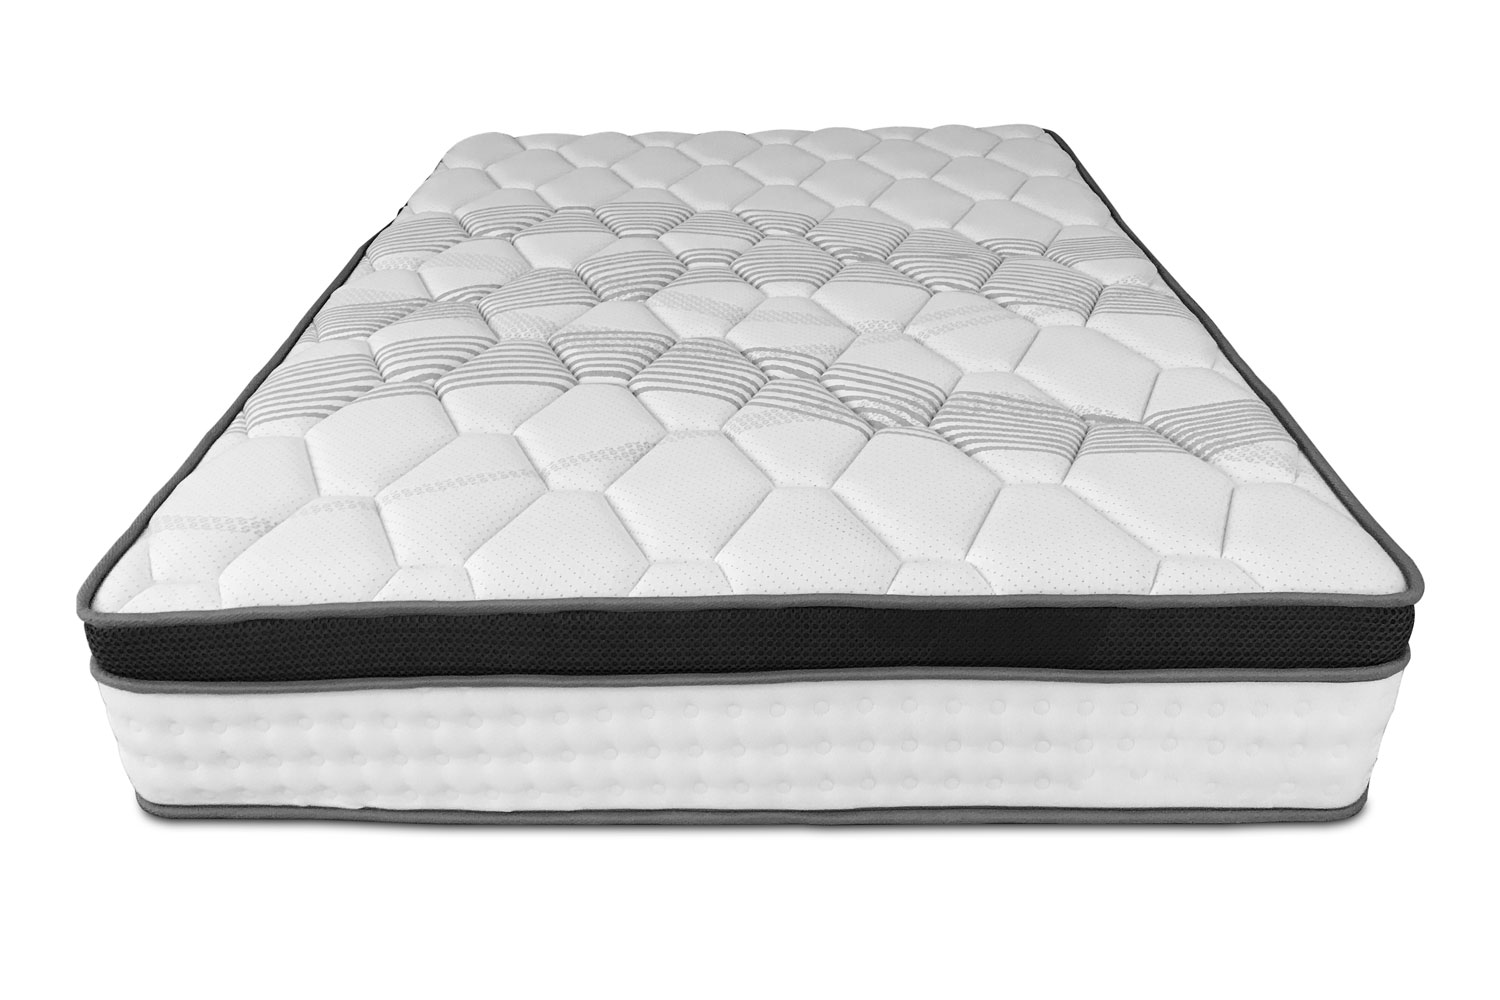 protection sleeves queen mattress